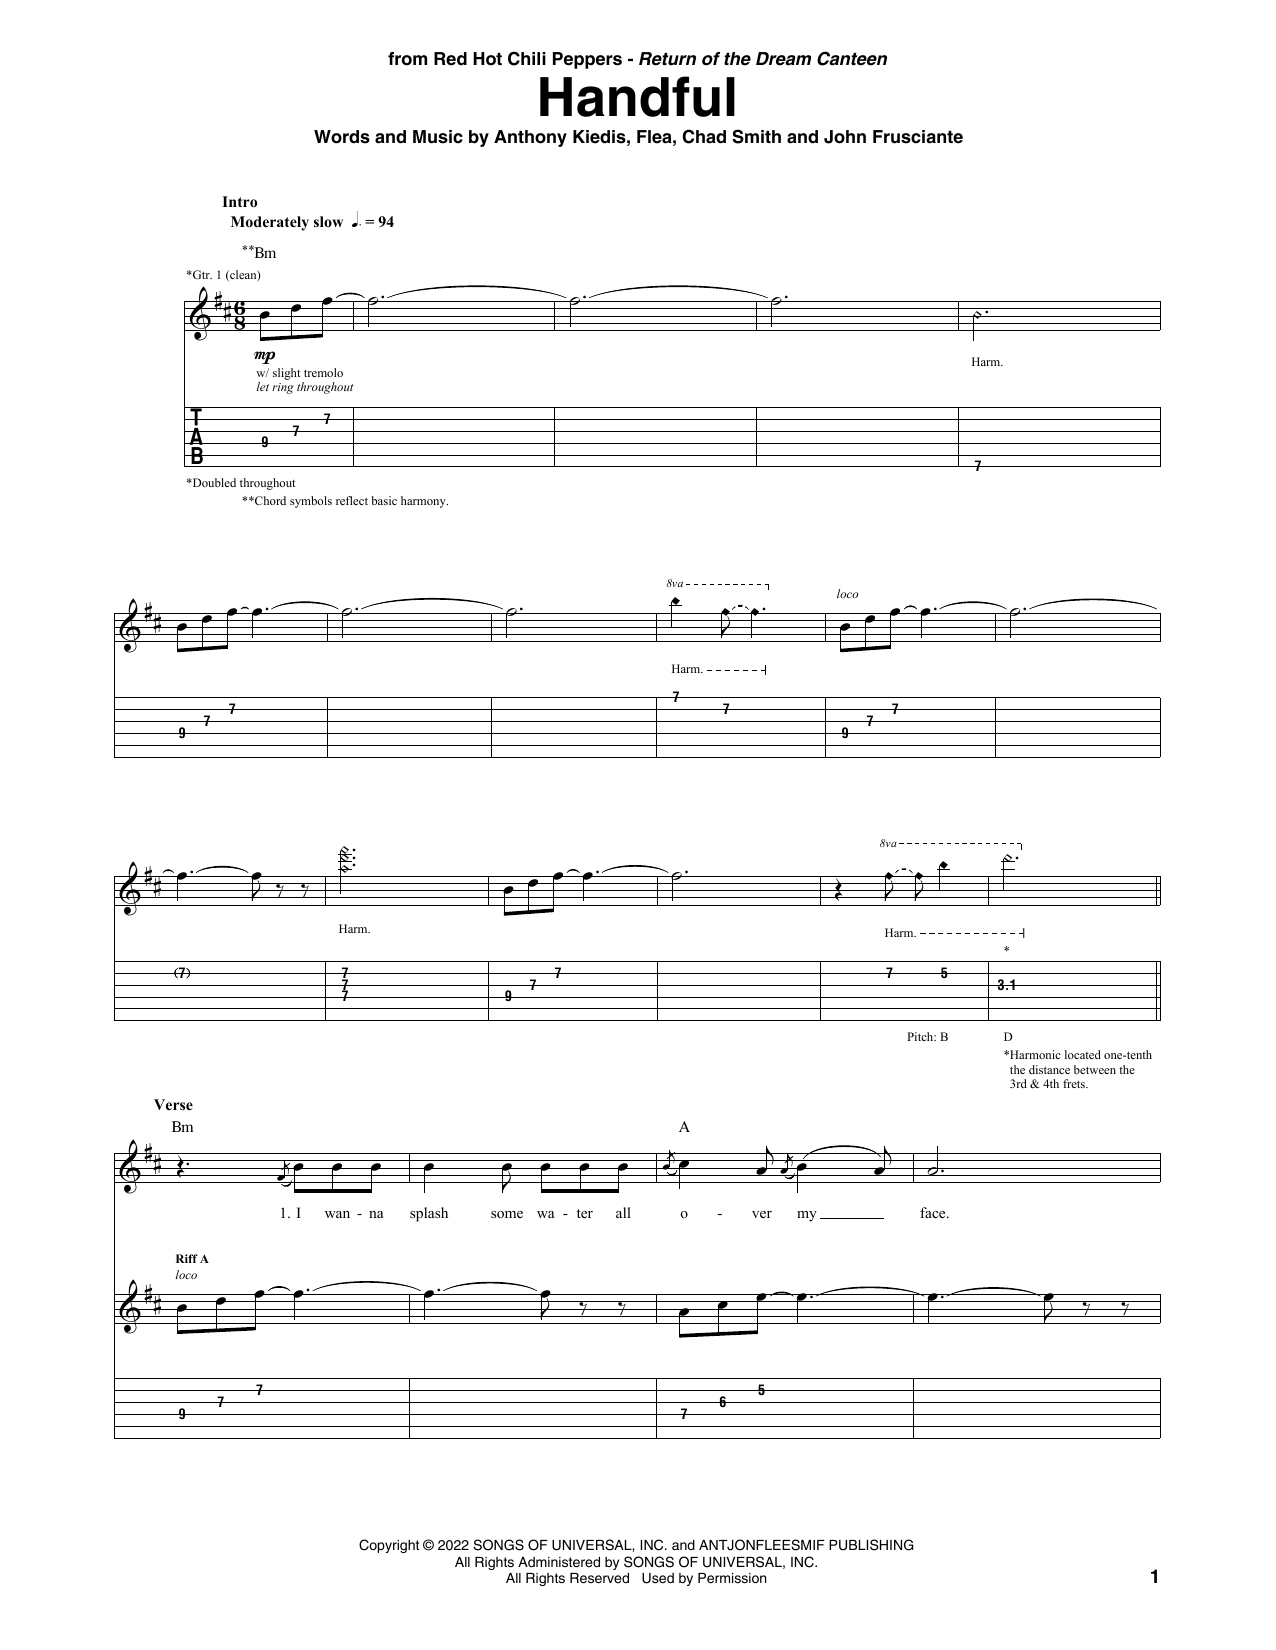 Download Red Hot Chili Peppers Handful Sheet Music